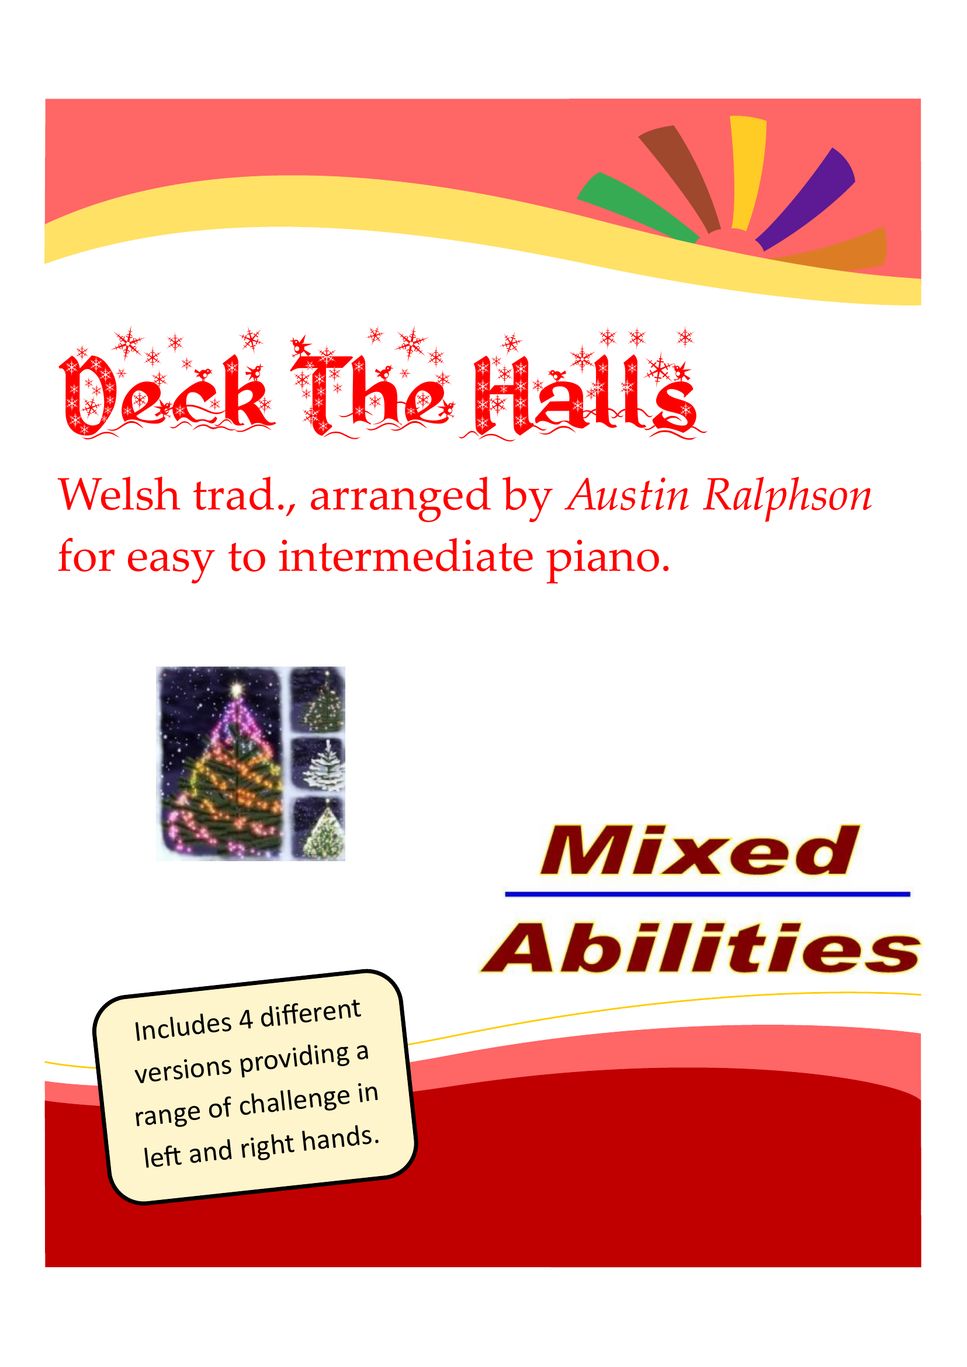 Welsh Traditional - Deck The Halls - for easy piano to intermediate piano by Austin Ralphson